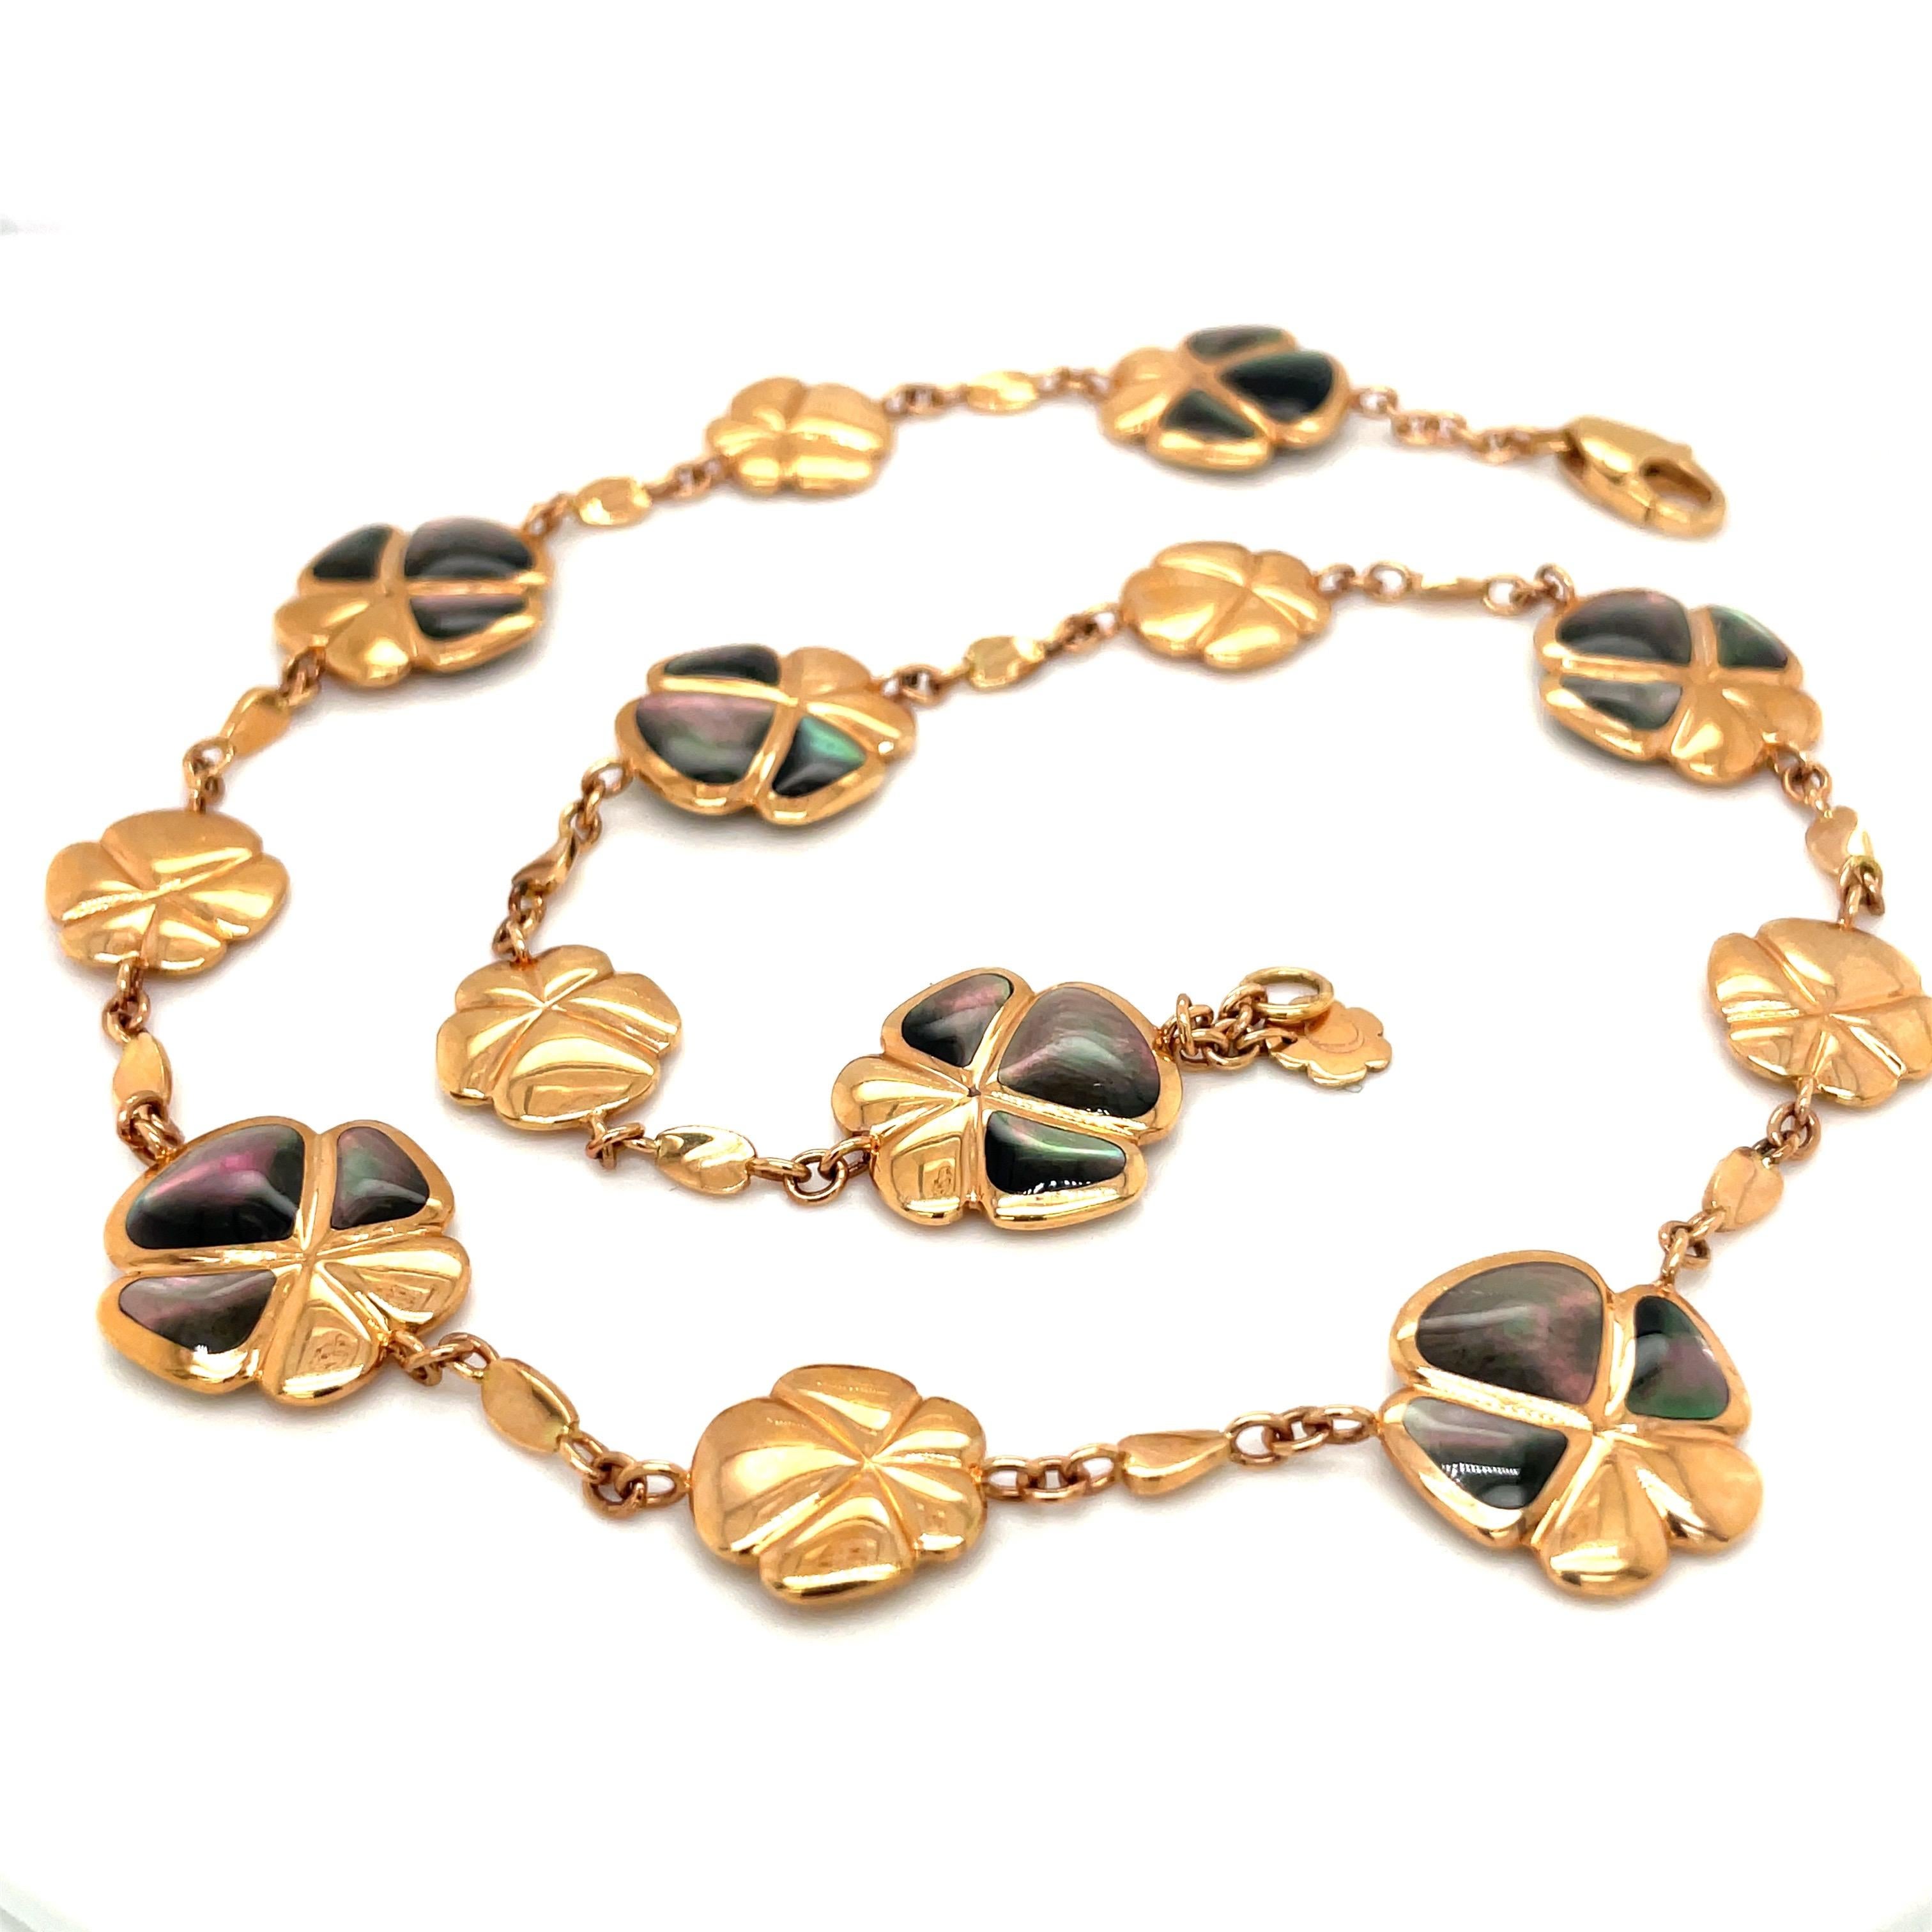 Created by famed Italian Jewelers, De AMBROSI, exclusively for Cellini Jewelers this flower necklace is inlaid with black mother-of-pearl alternating with small gold flowers. As a show of the excellent craftsmanship the flowers are completely